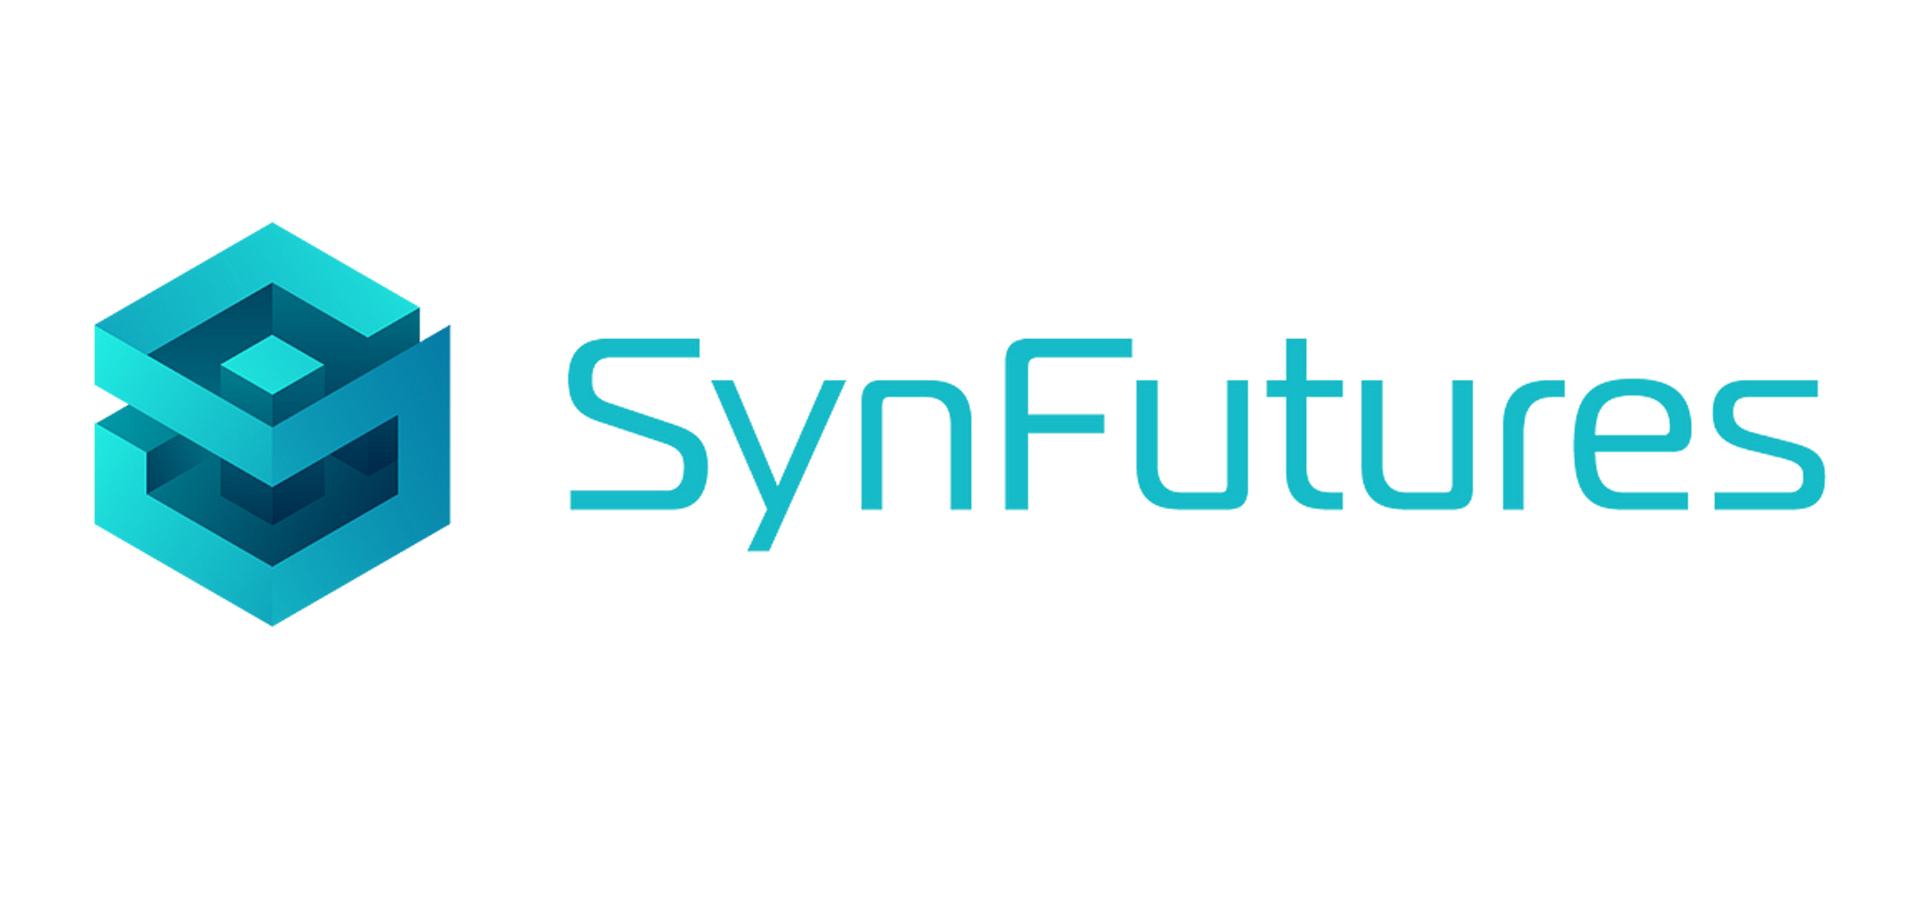 DEX Platform SynFutures Secures $22M in Series B Funding Round Led By Pantera Capital